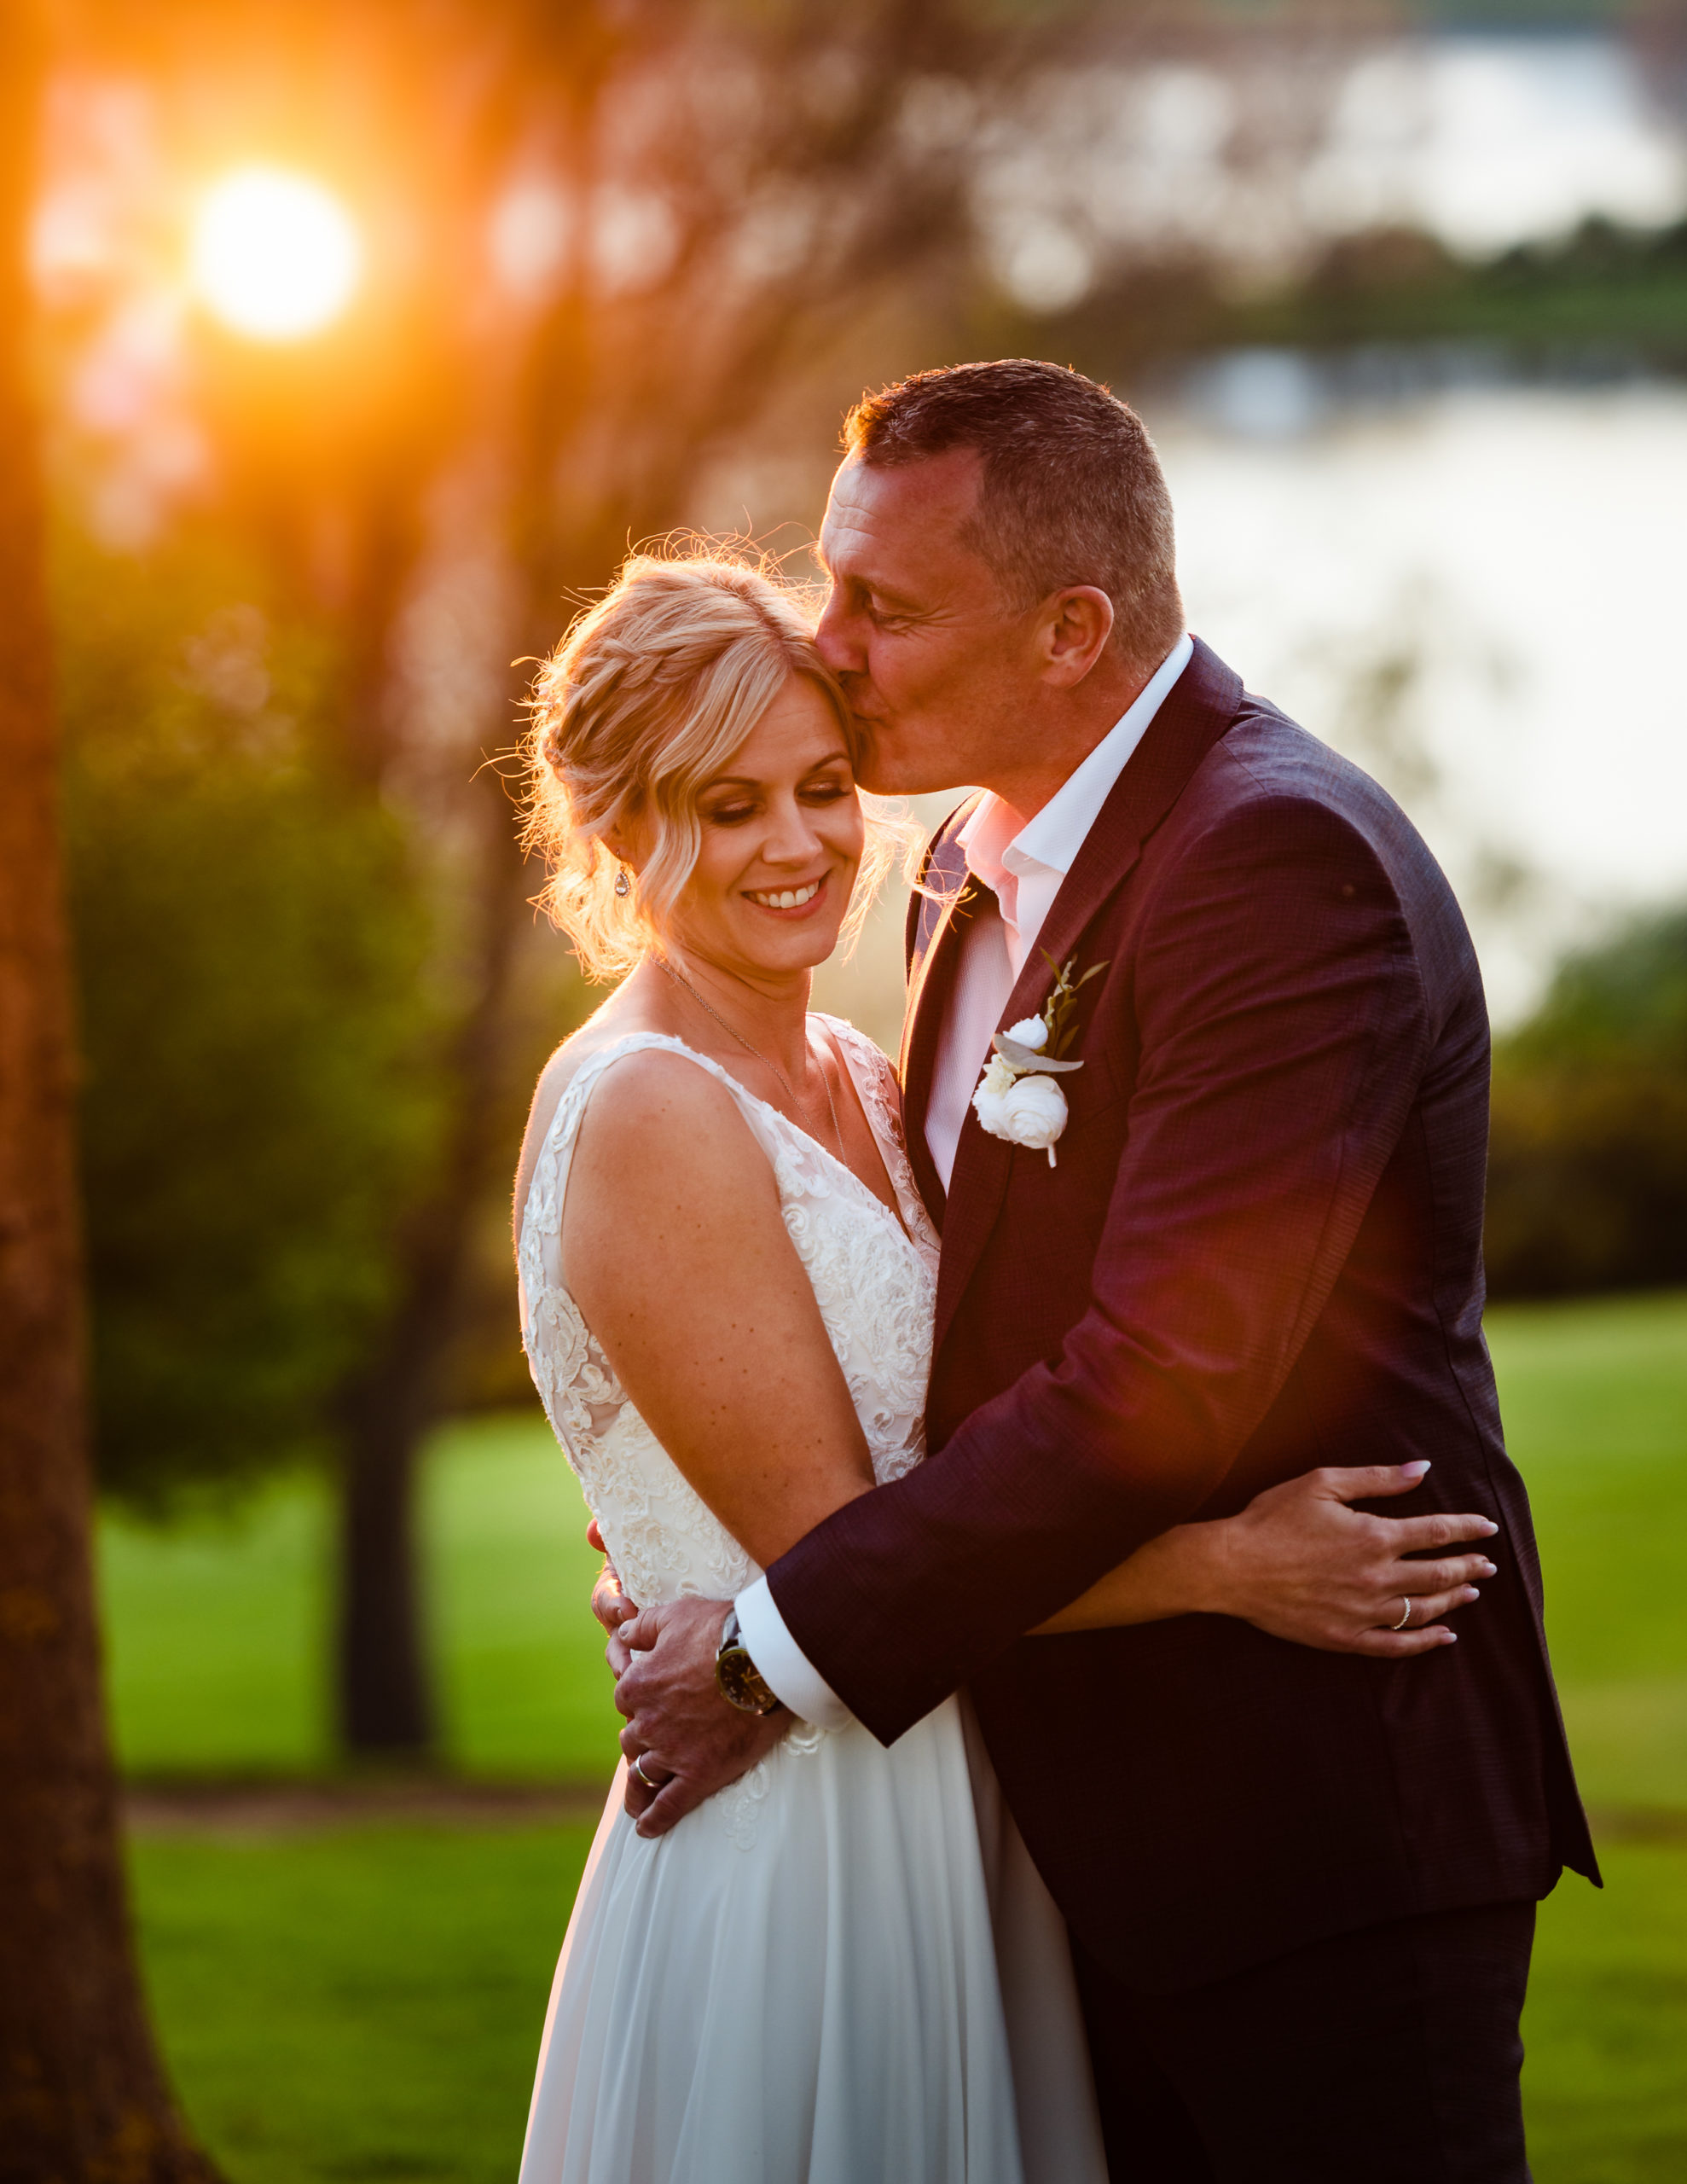 wedding day portraits at barnsdale gardens